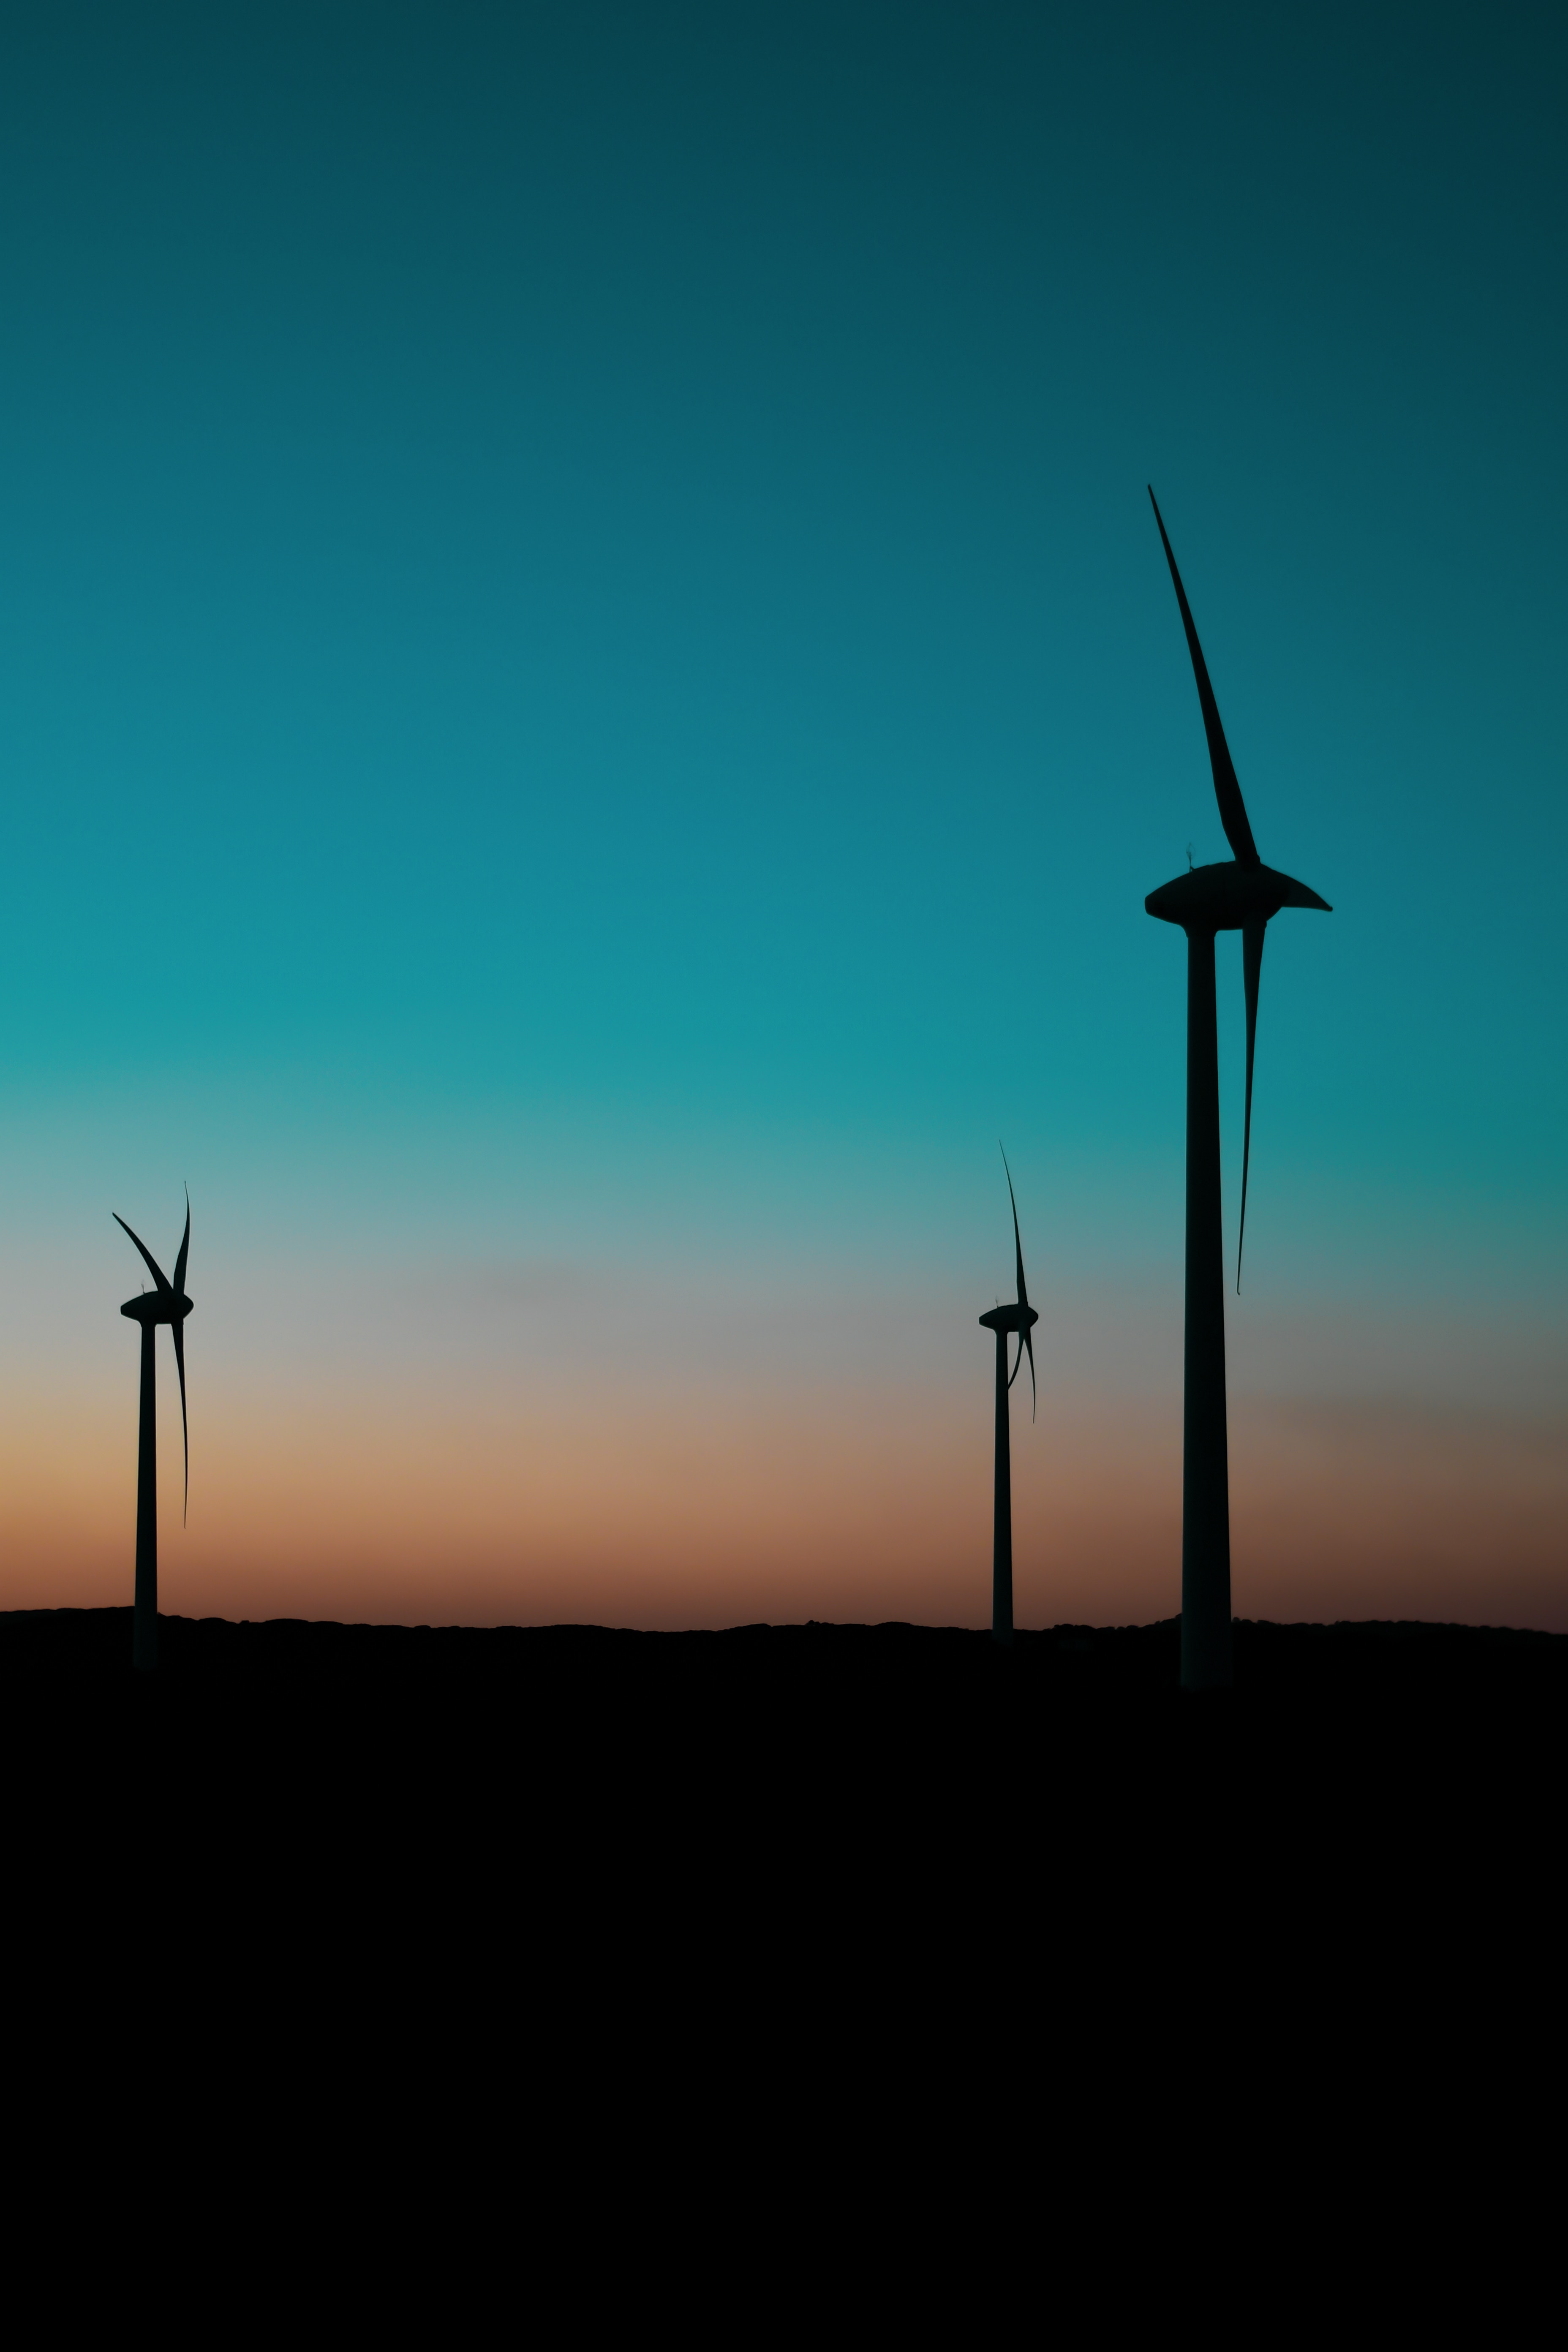 posts, blades, dusk, wind power plant HD Wallpaper for Phone